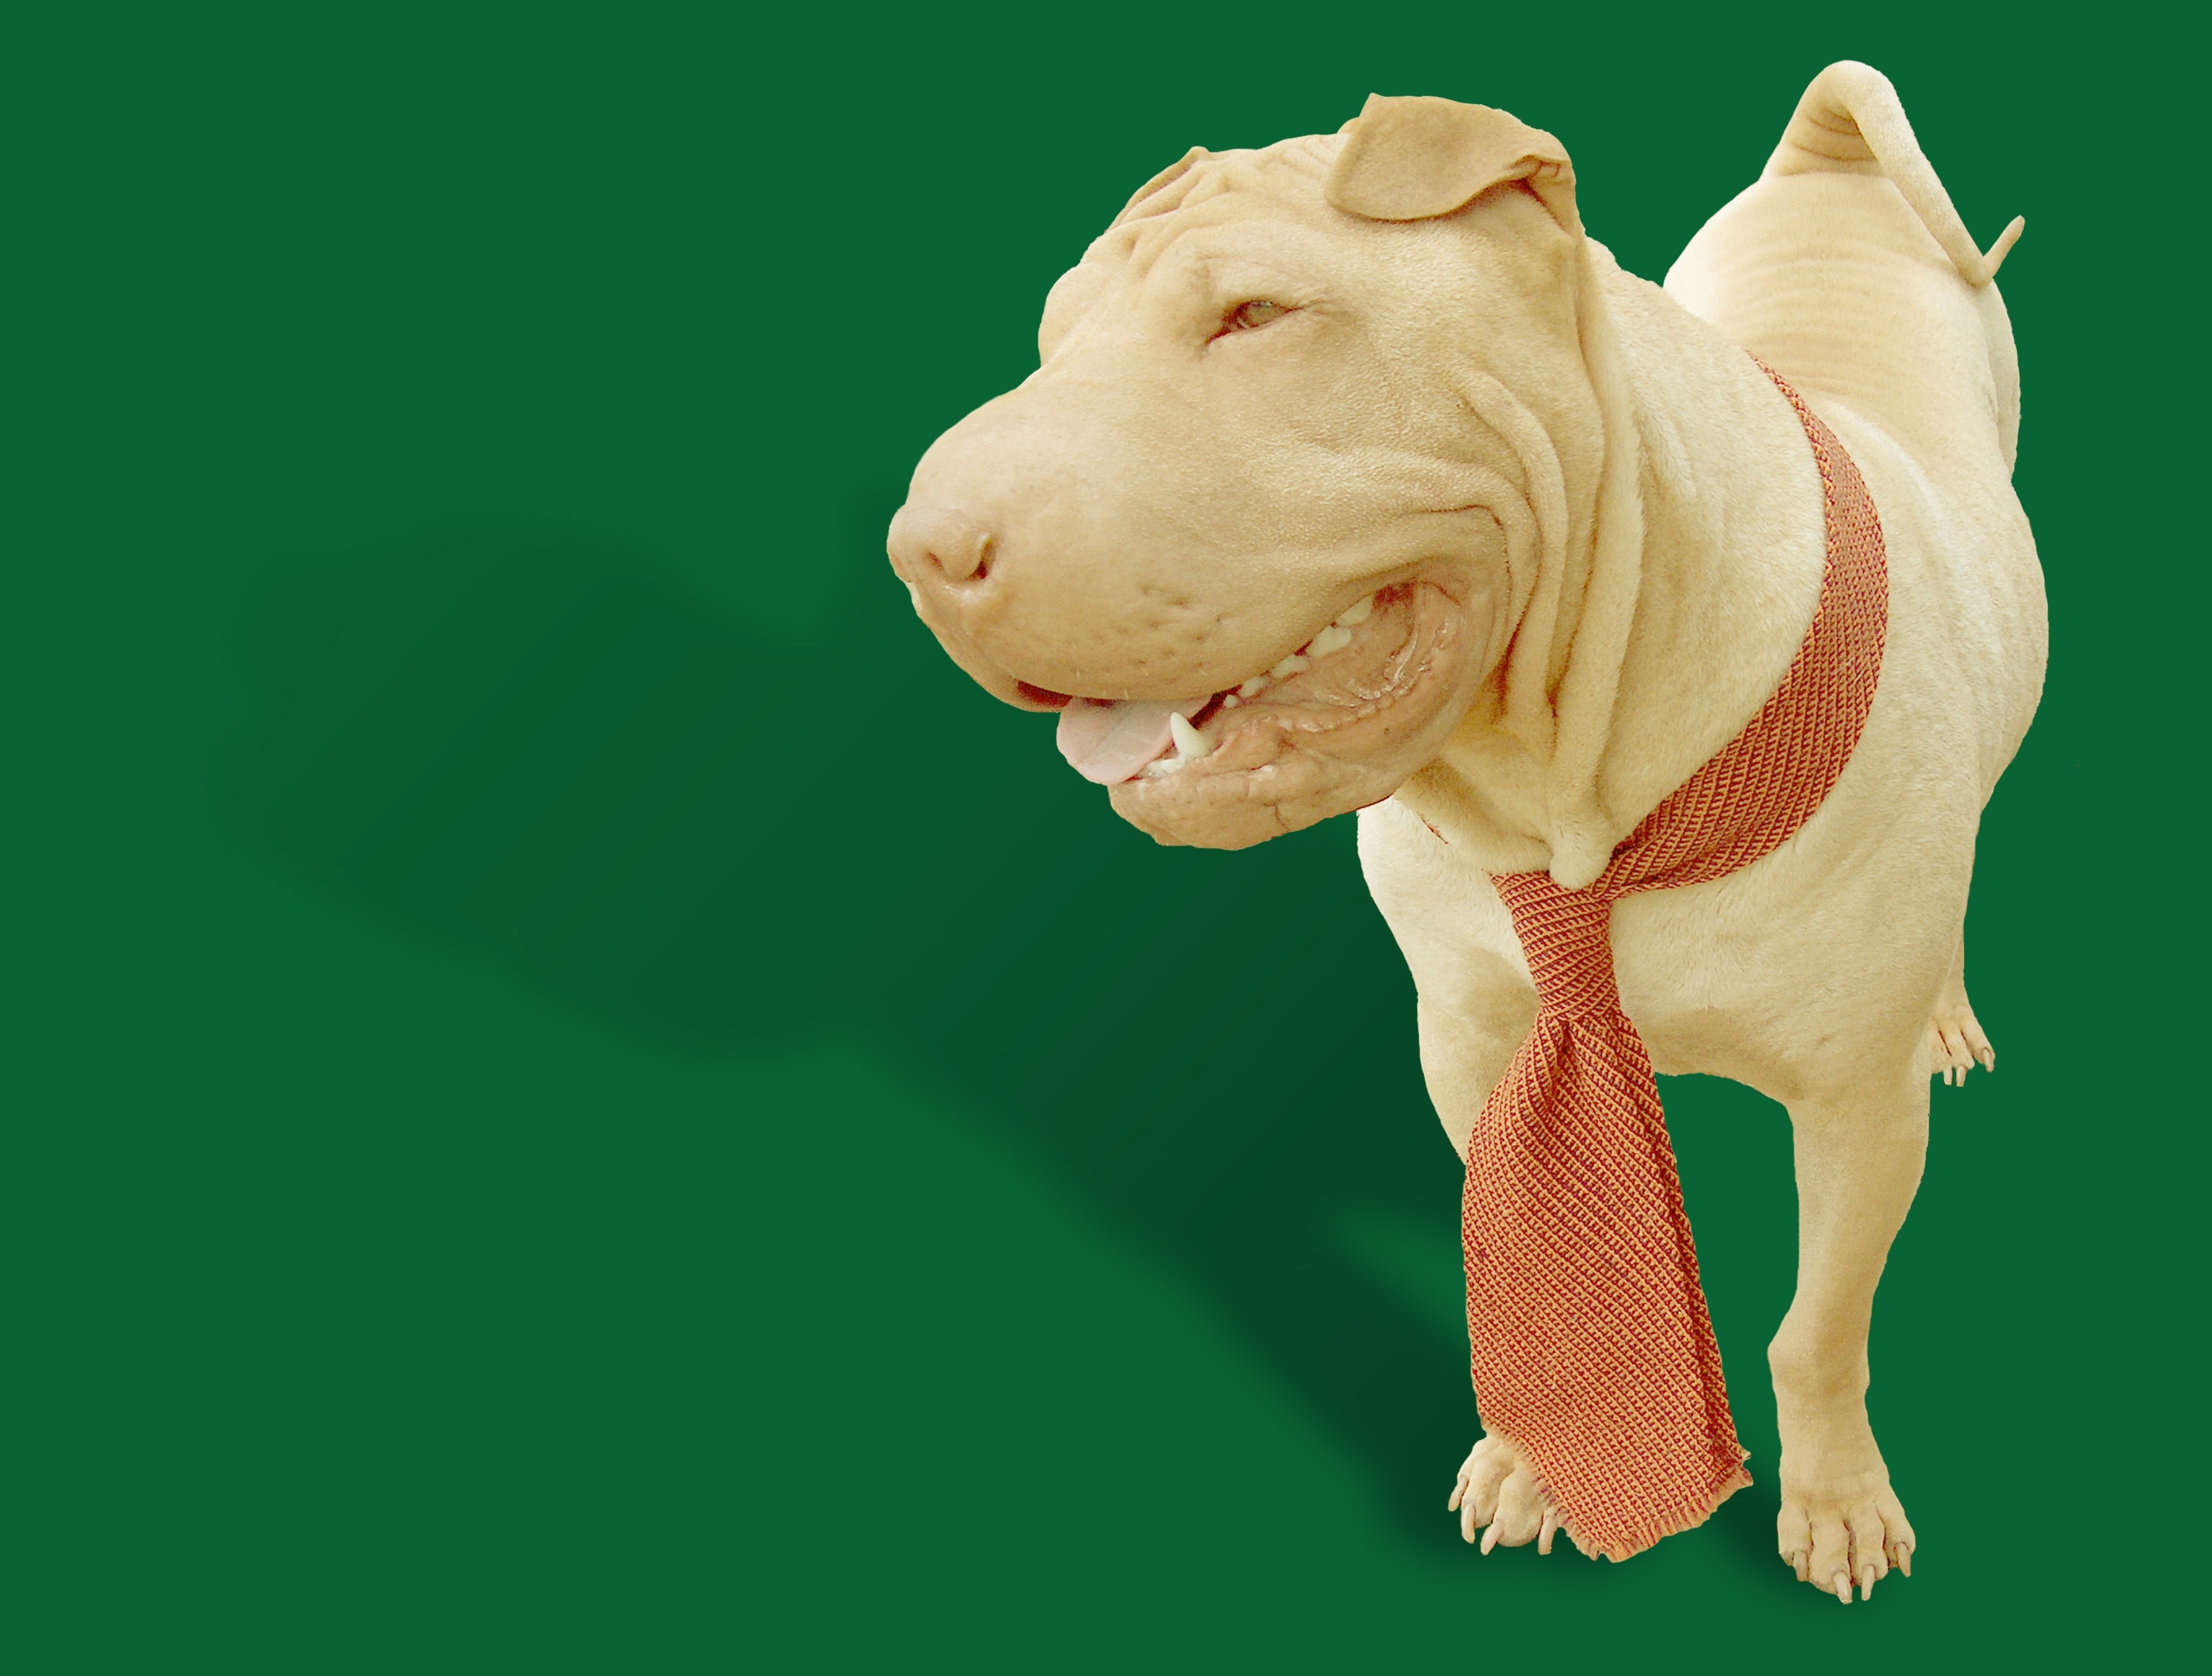 Chinese, Cute, Dog, Shar Pei, Canine, one animal, colored background